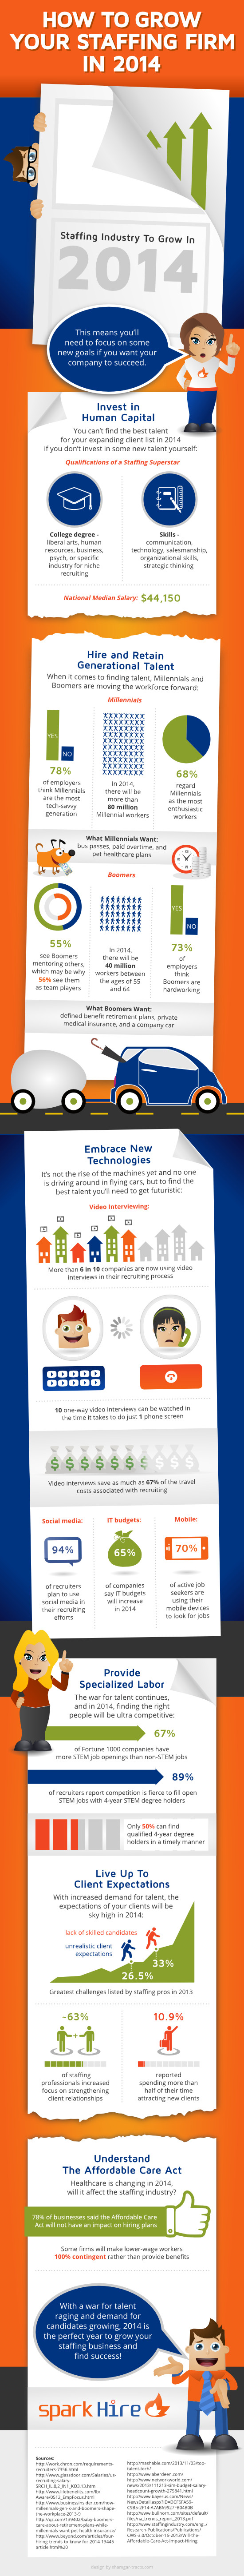 How To Grow Your Staffing Firm In 2014 Infographic